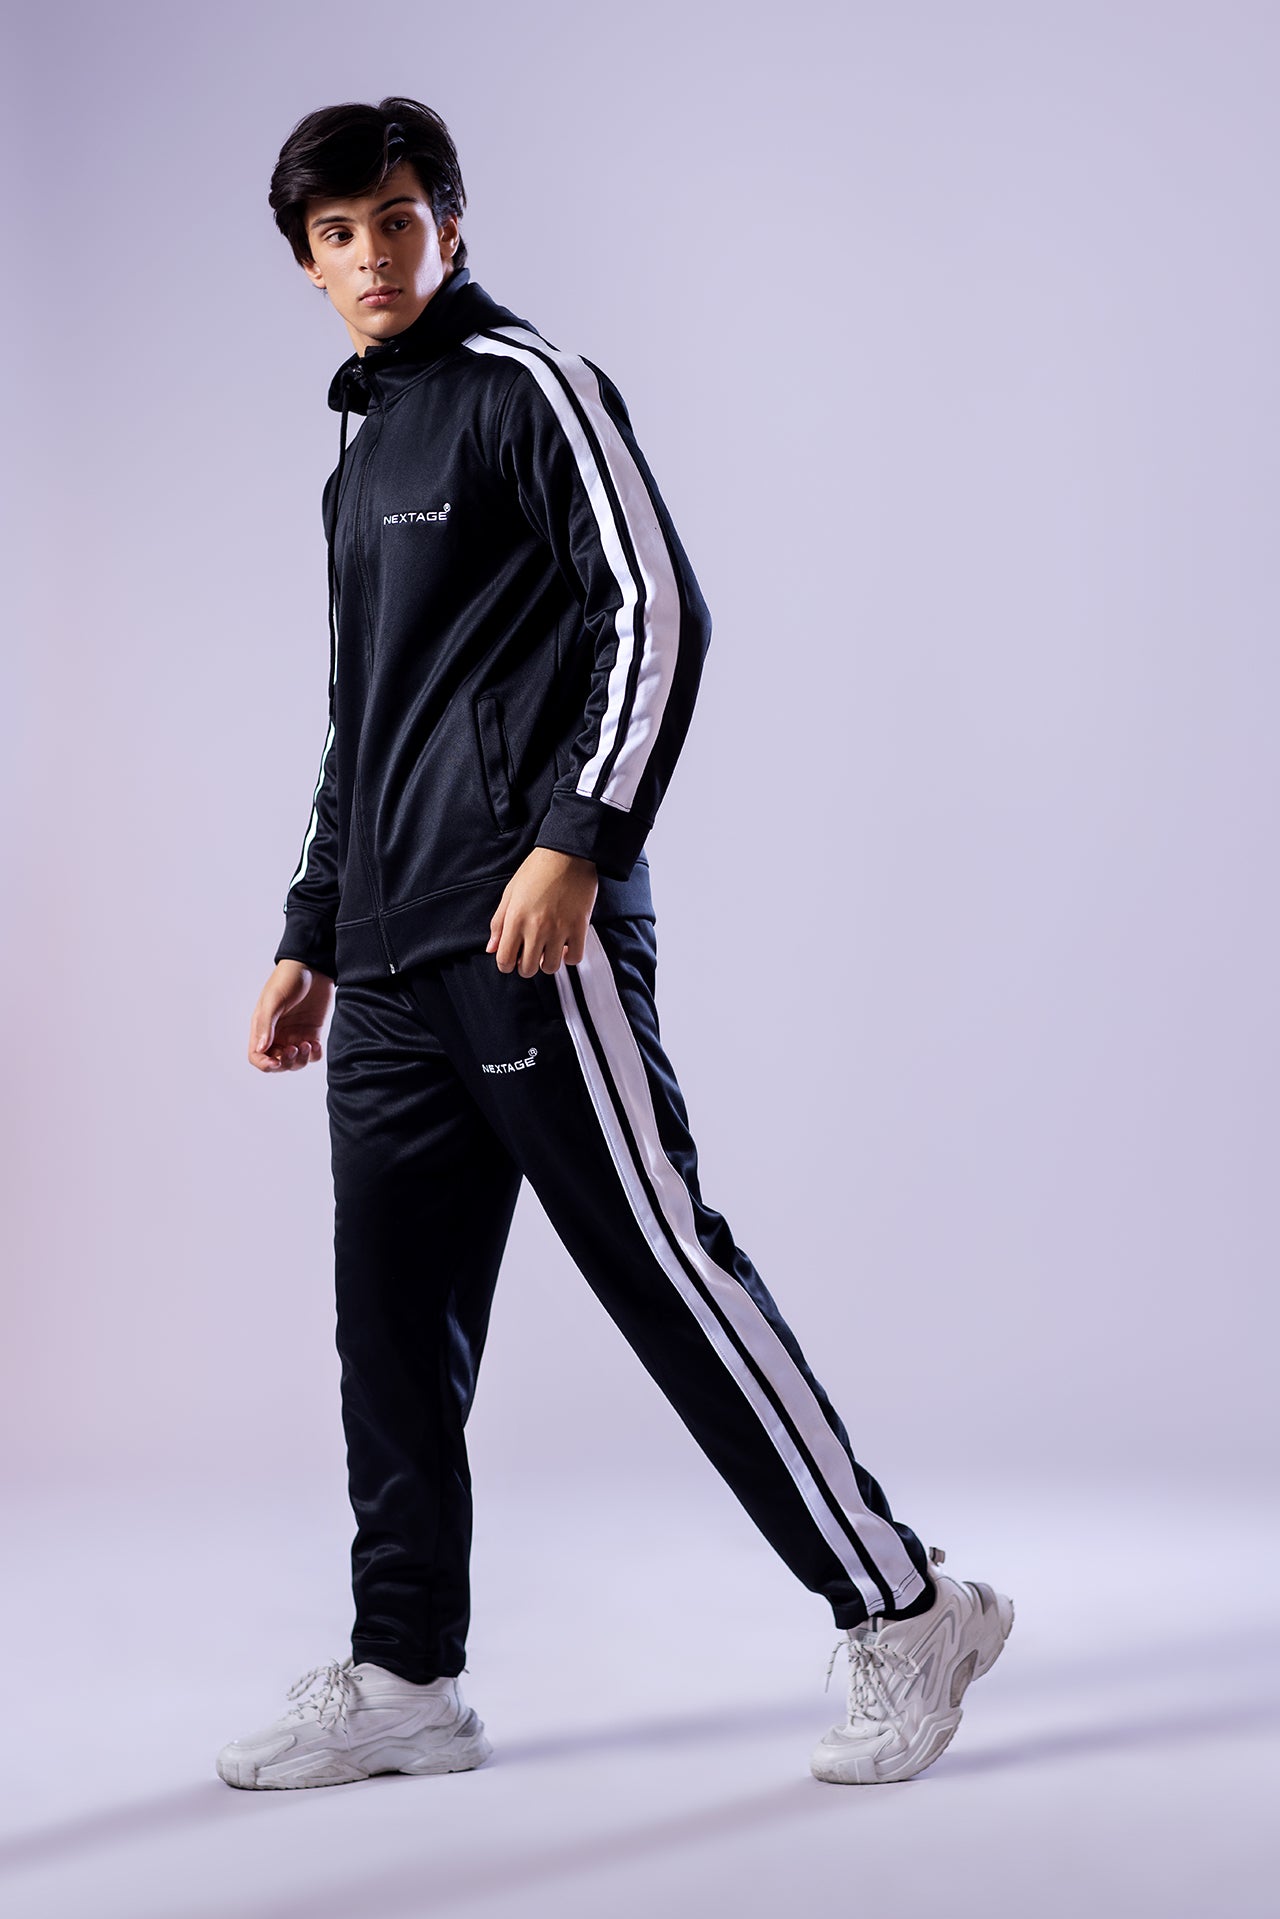 sports tracksuit online in pakistan, mens sports tracksuit,